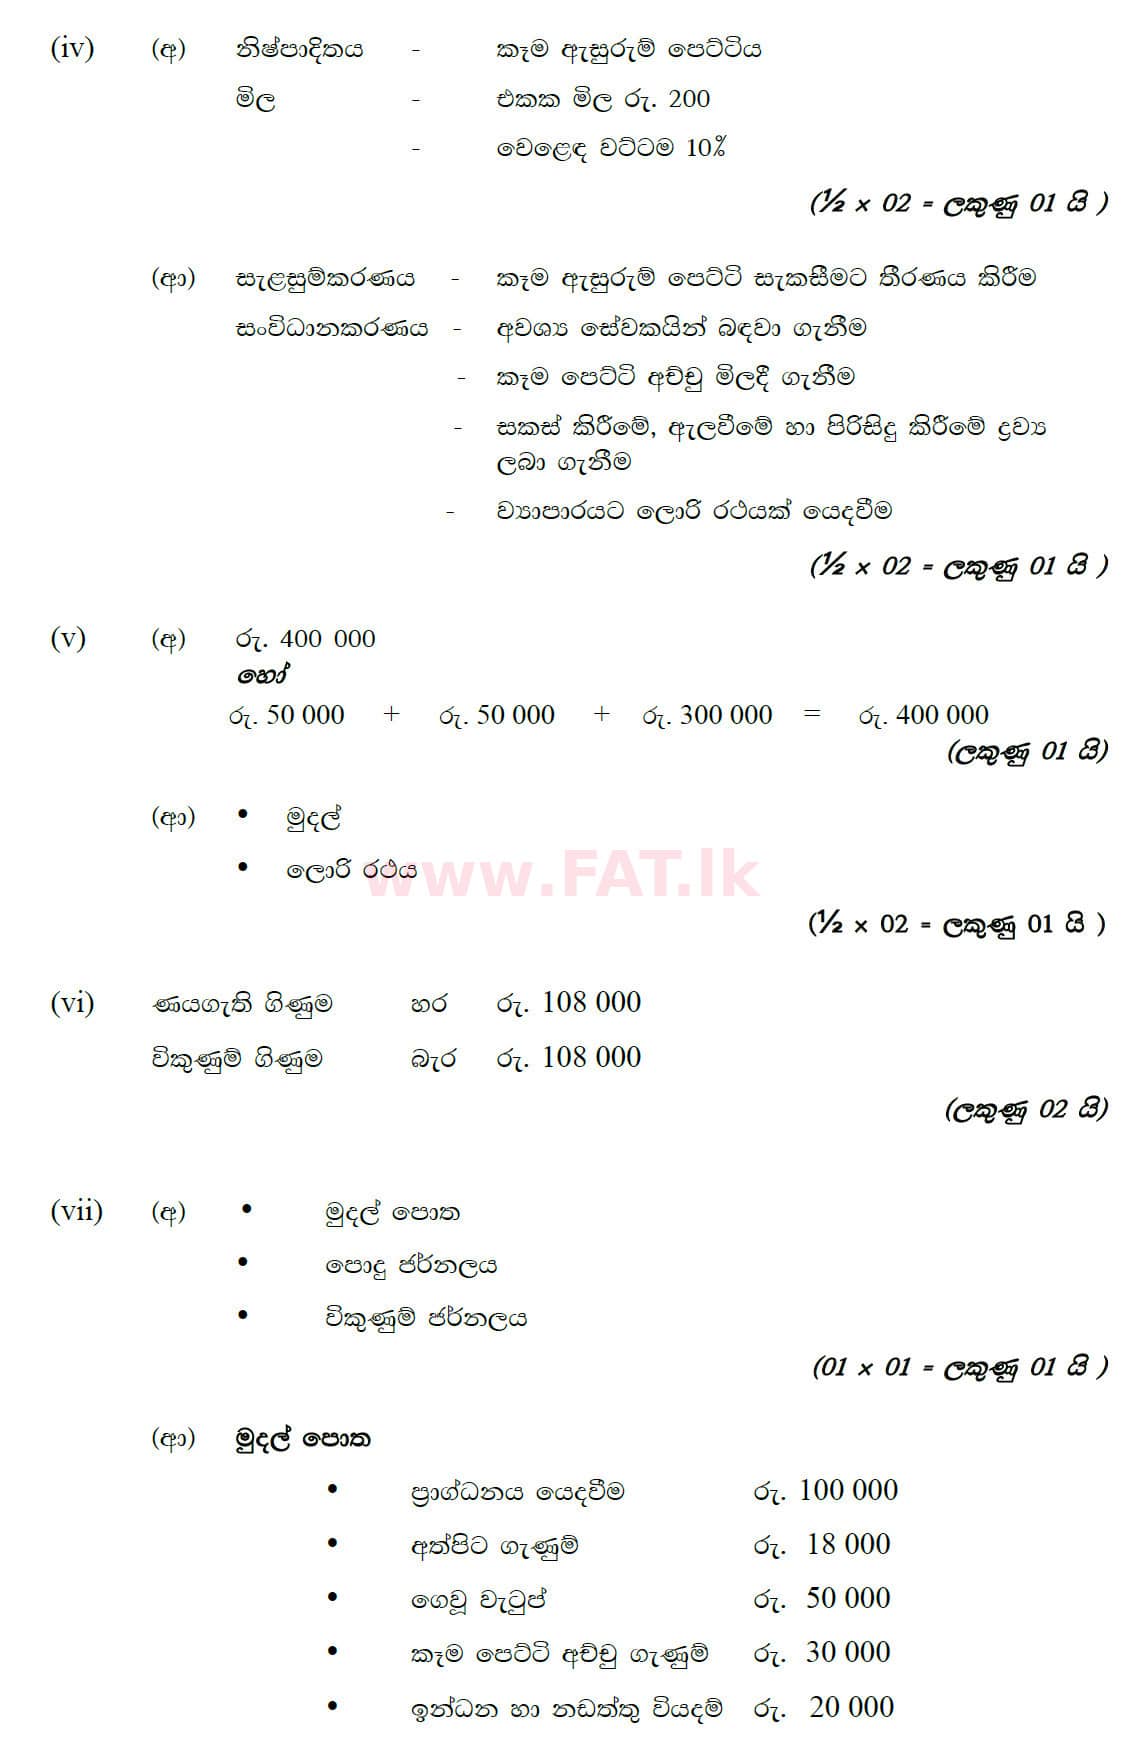 National Syllabus : Ordinary Level (O/L) Business and Accounting Studies - 2020 March - Paper II (සිංහල Medium) 1 5757